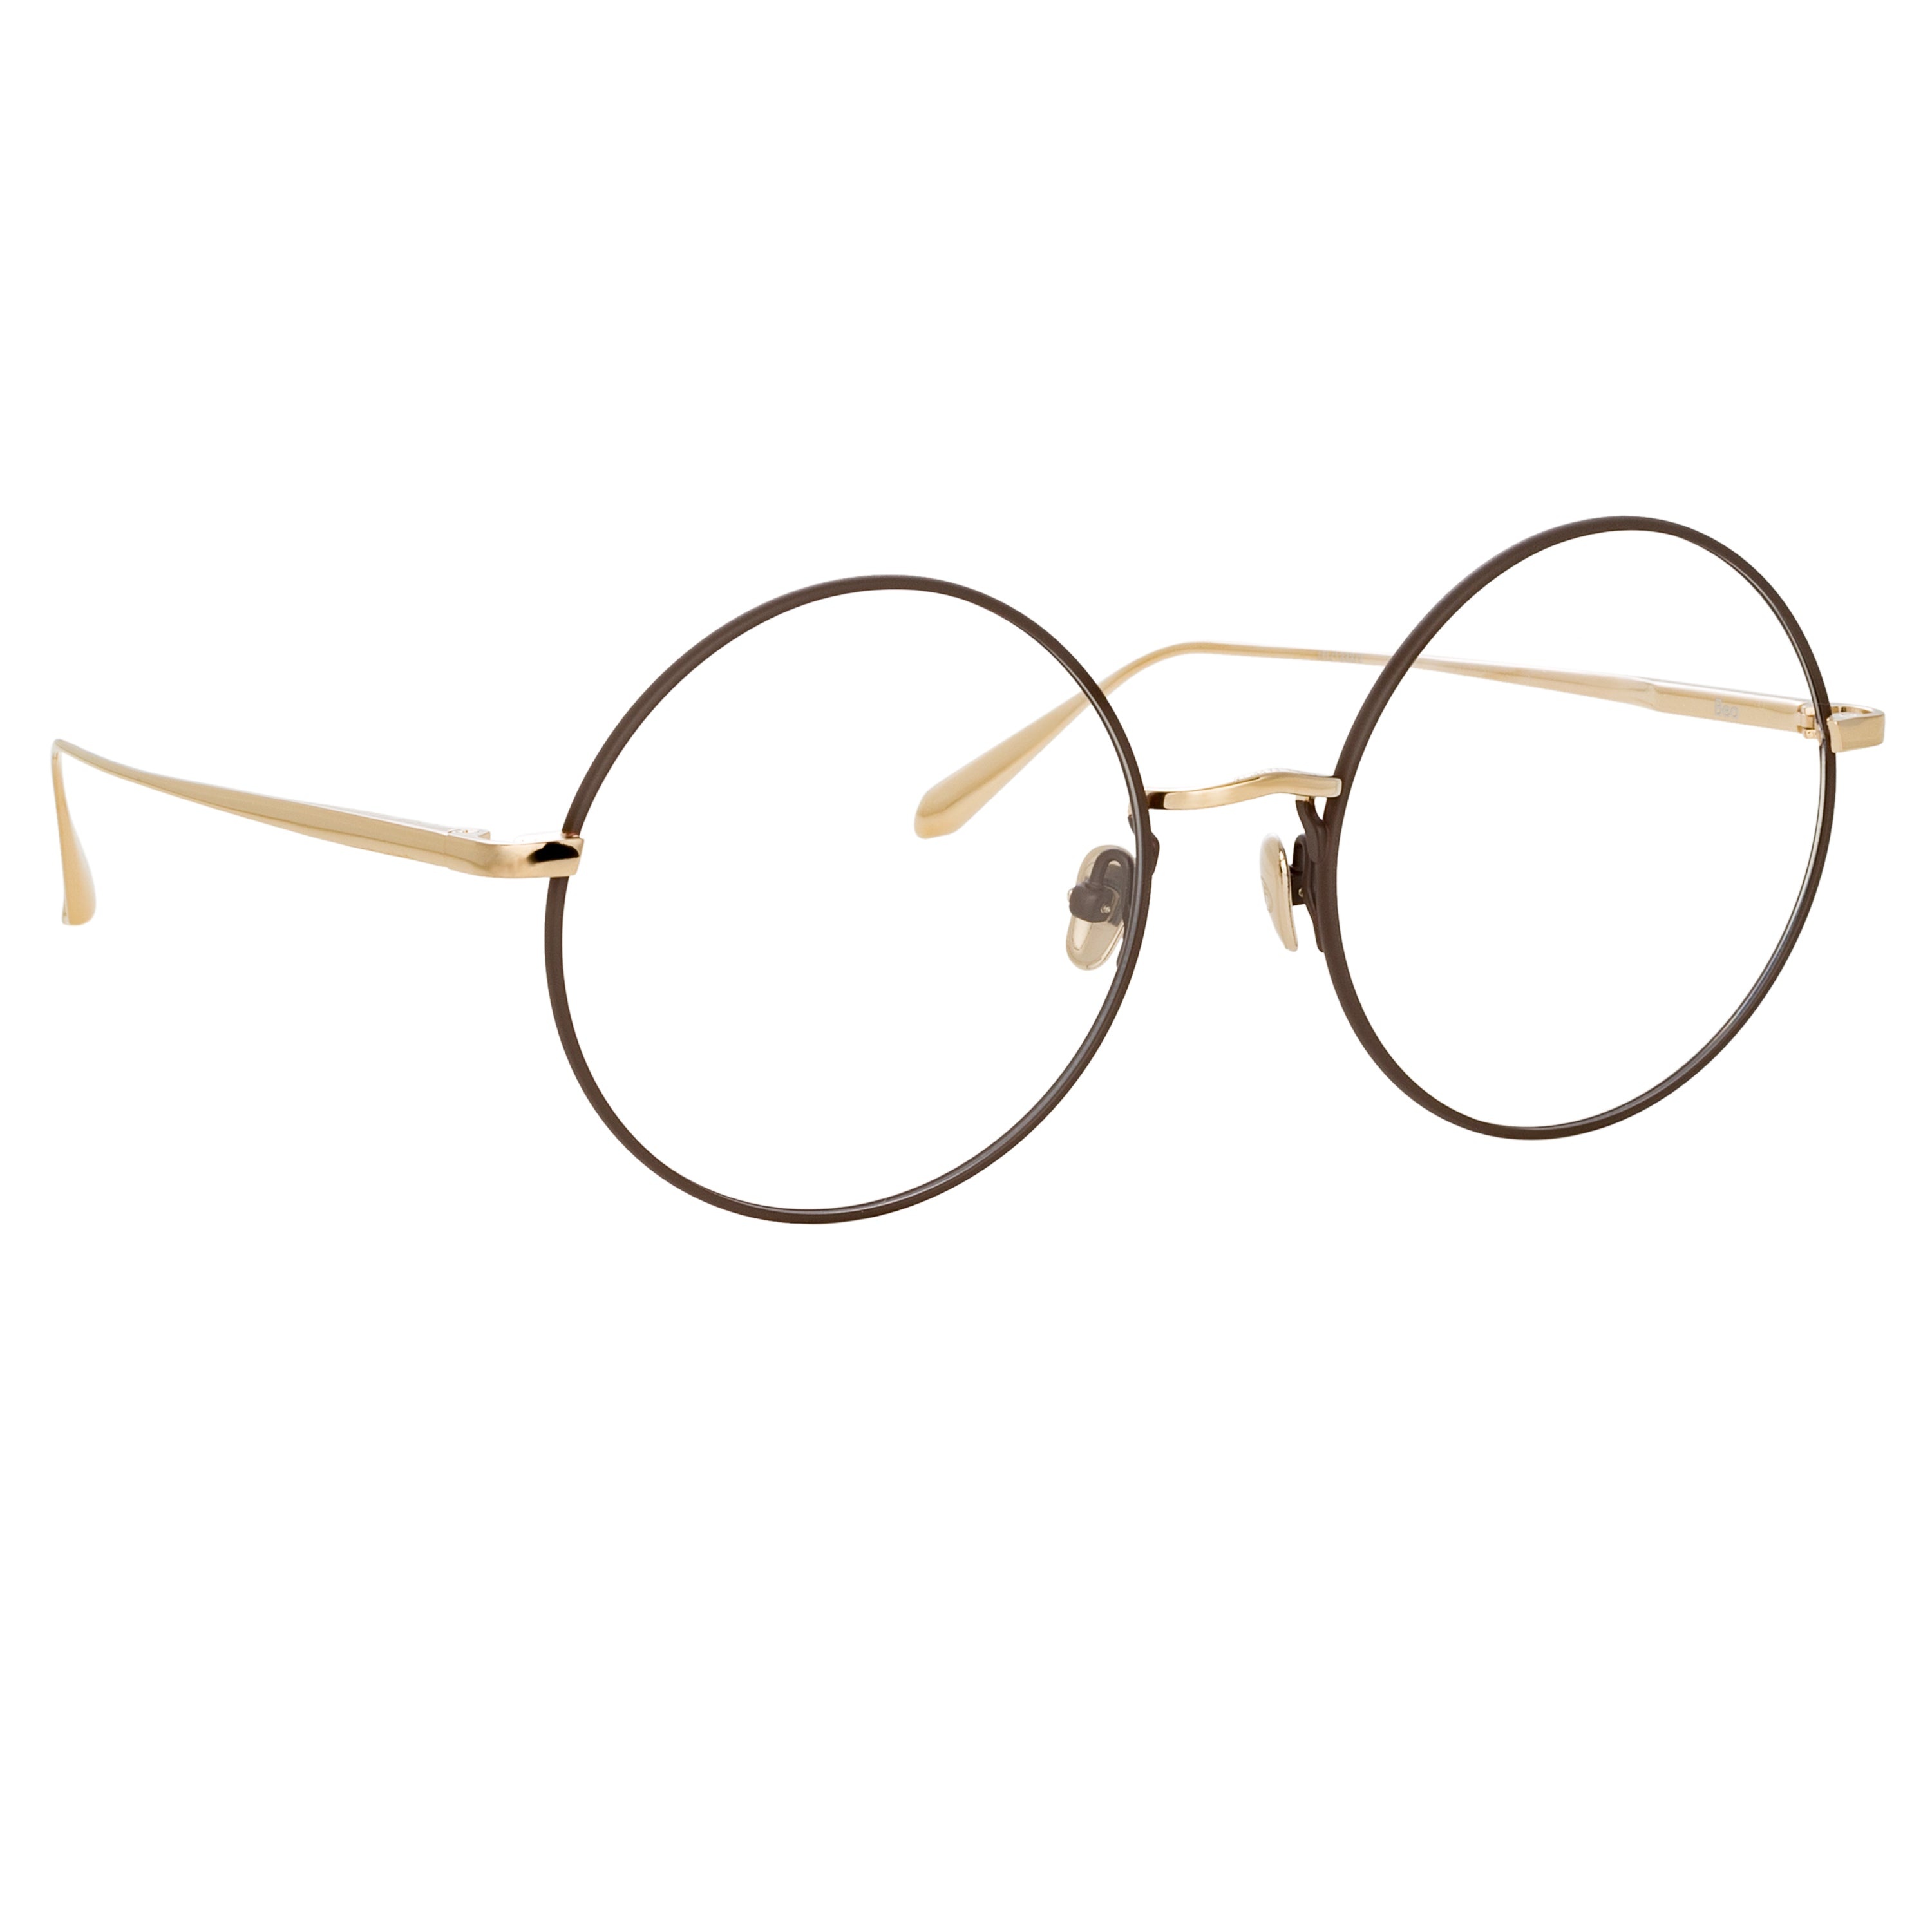 BEA ROUND OPTICAL FRAME IN LIGHT GOLD - 3